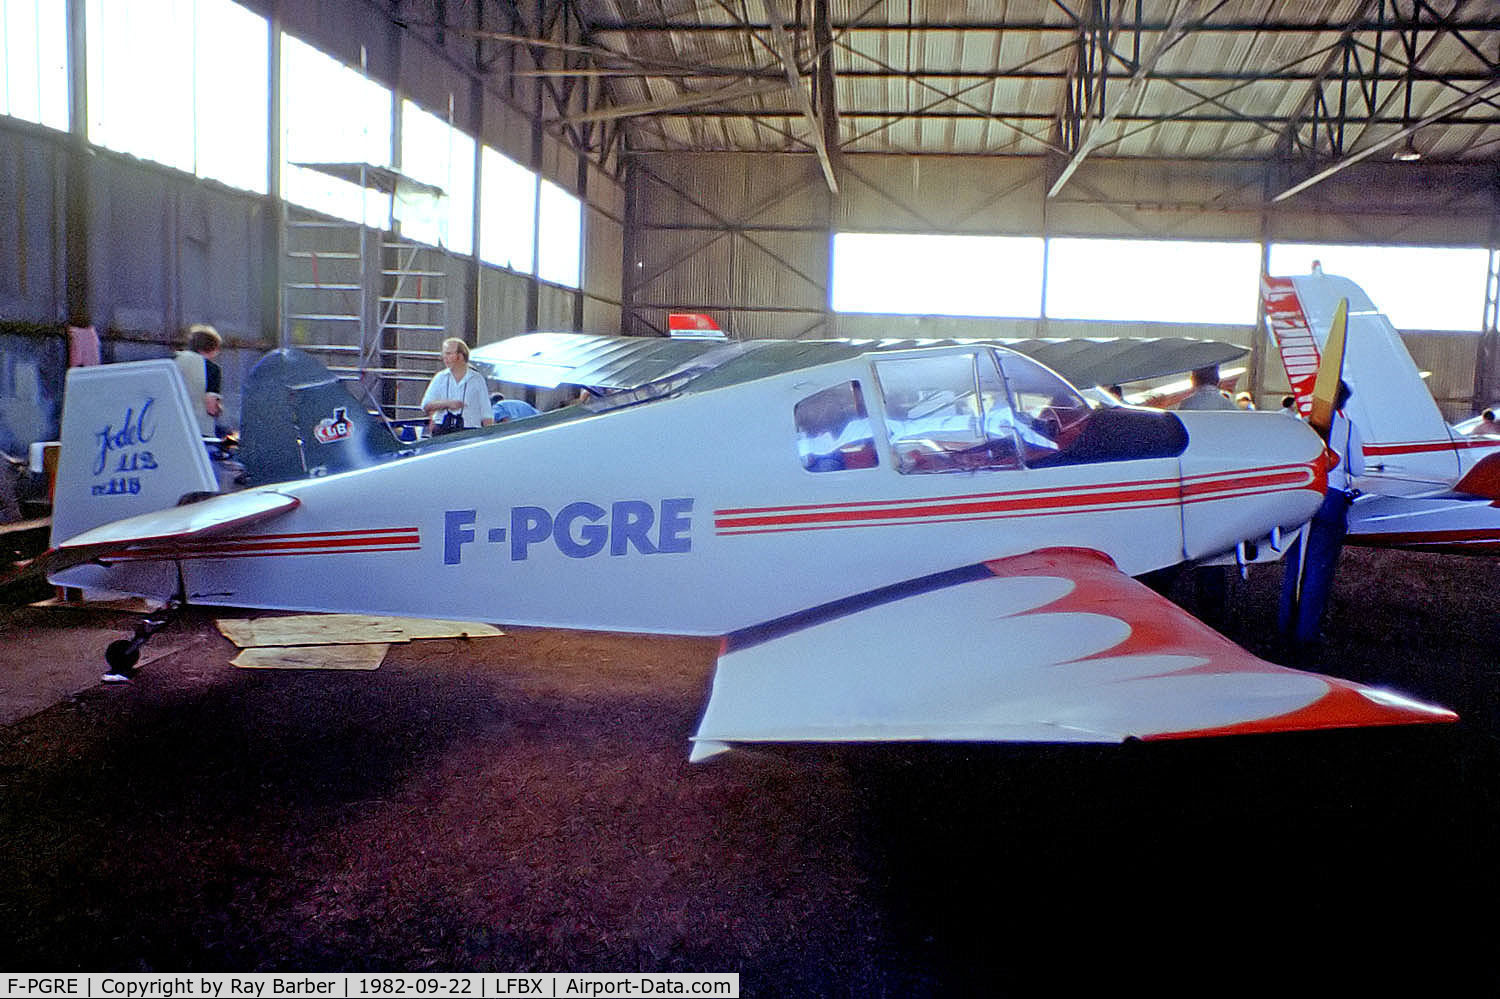 F-PGRE, Jodel D-112 C/N 115, Jodel D.112 [115] Perigueux-Bassillac~F 22/09/1982. From a slide.